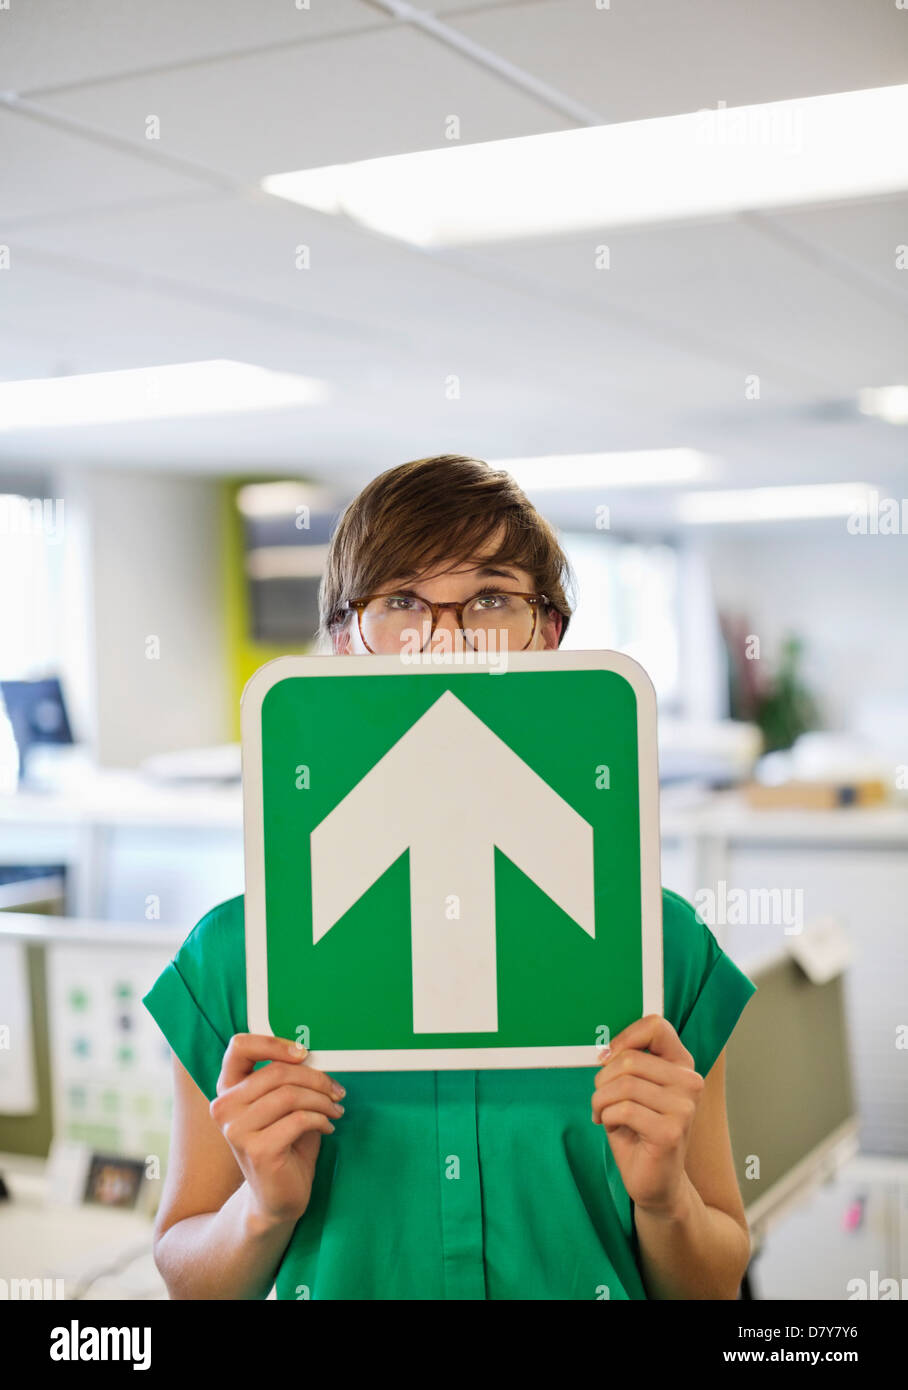 Businesswoman holding arrow sign in office Banque D'Images